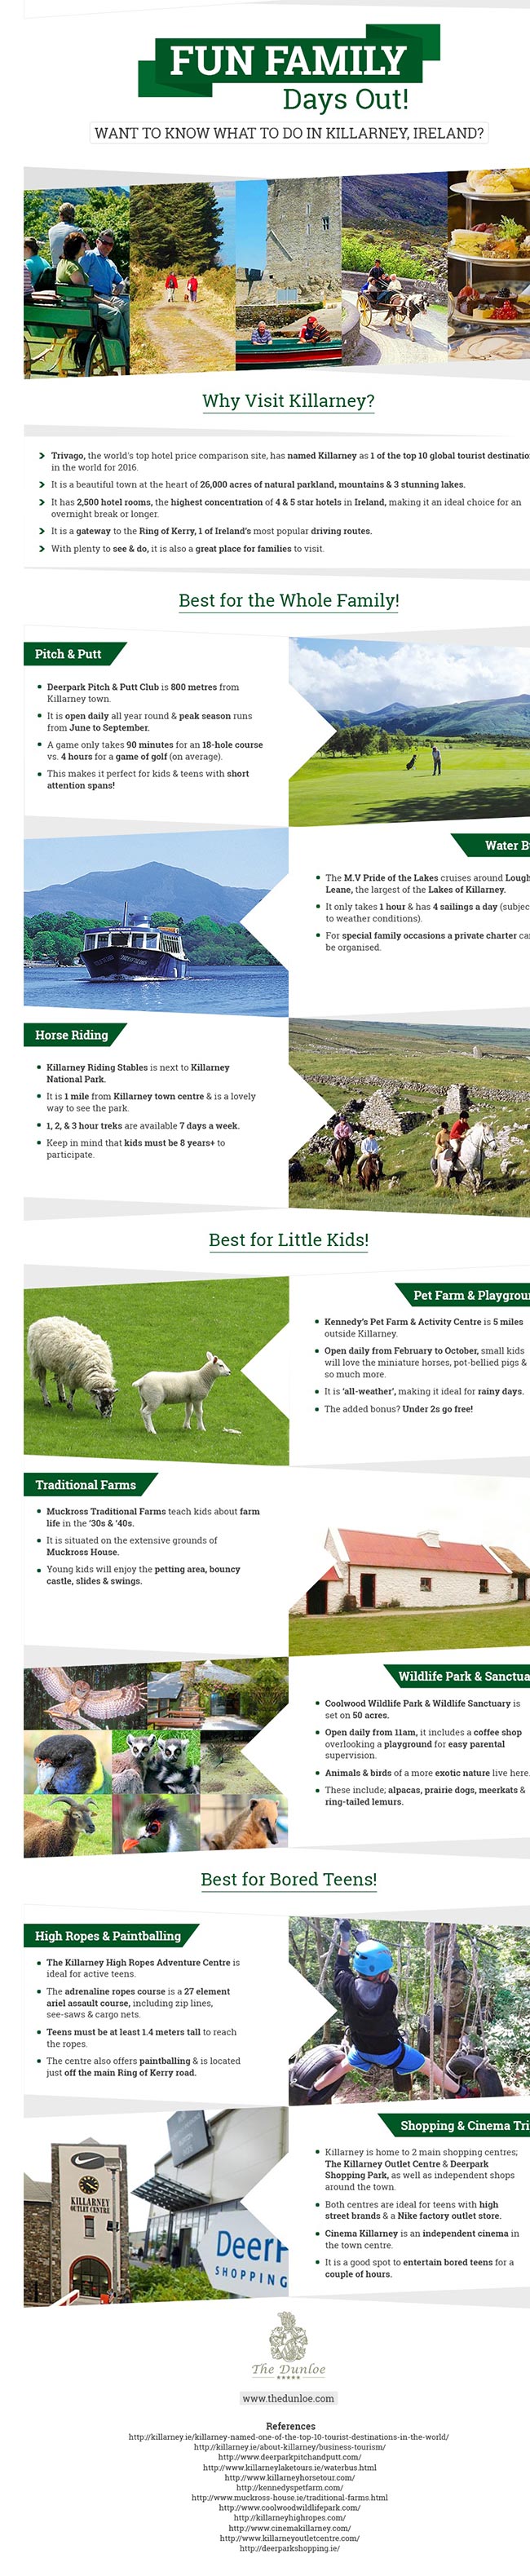 a-guide-to-fun-family-days-out-in-killarney-ireland-infographic